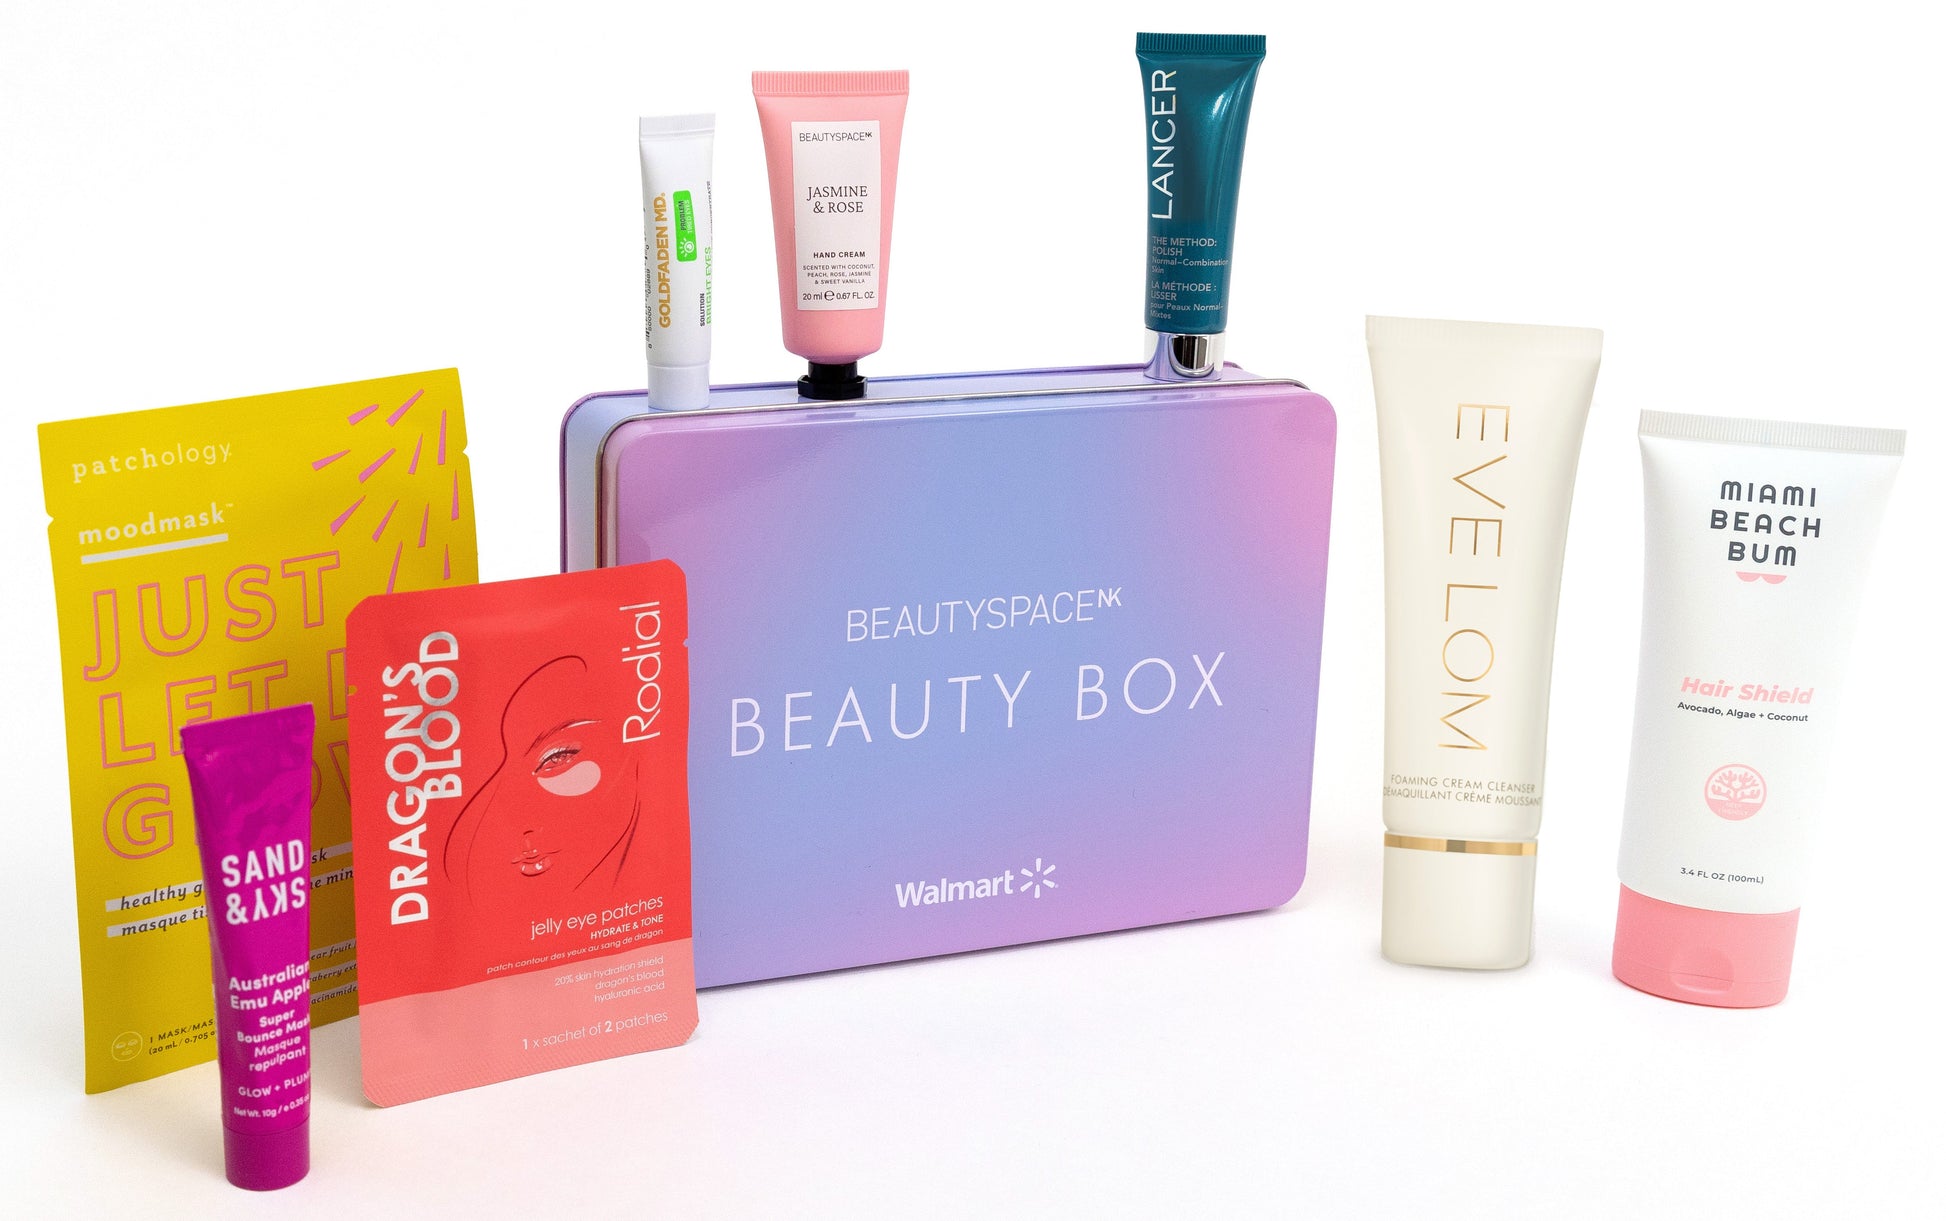 BeautySpaceNK Beauty Box on a white background surrounded by beauty products from: Sand & Sky, Rodial, Patchology, Goldfaden MD, BeautySpaceNK, Lancer, Miami Beach Bum, and Eve Lom.